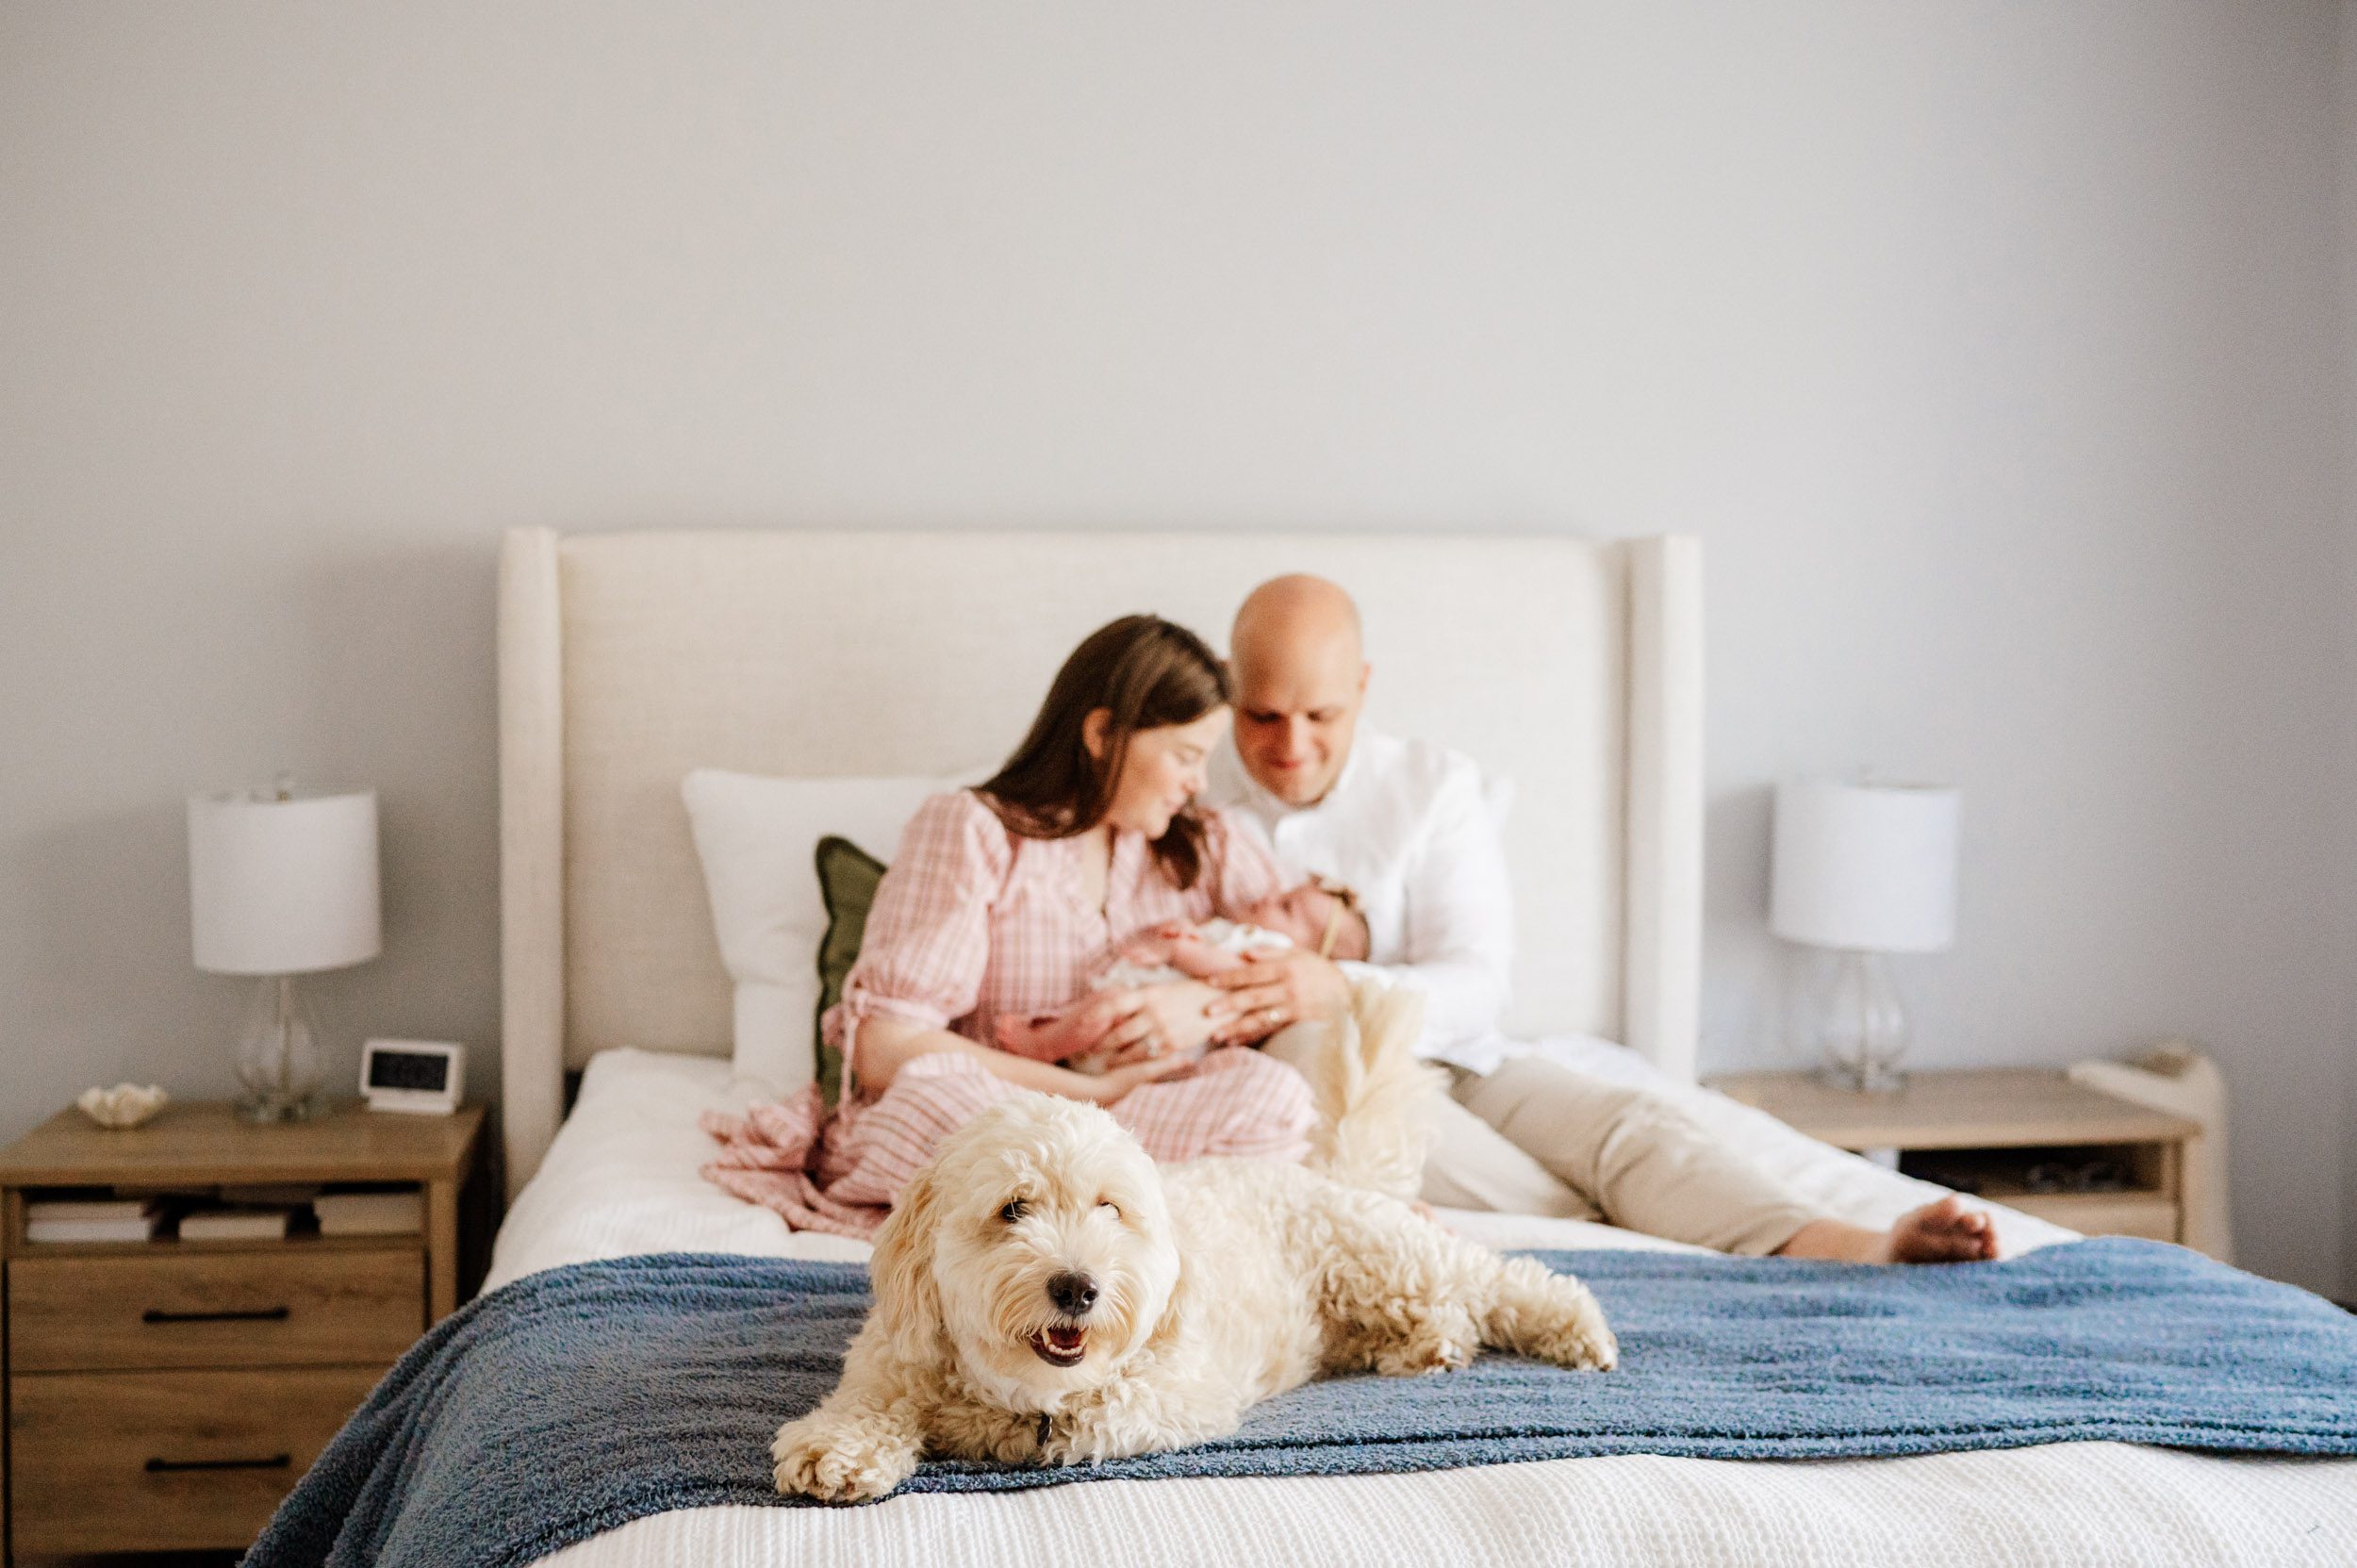 parents sitting on their bed holding their baby girl and smiling down at her while their dog lays at the foot of the bed looking directly at the camera during an in home newborn photography session